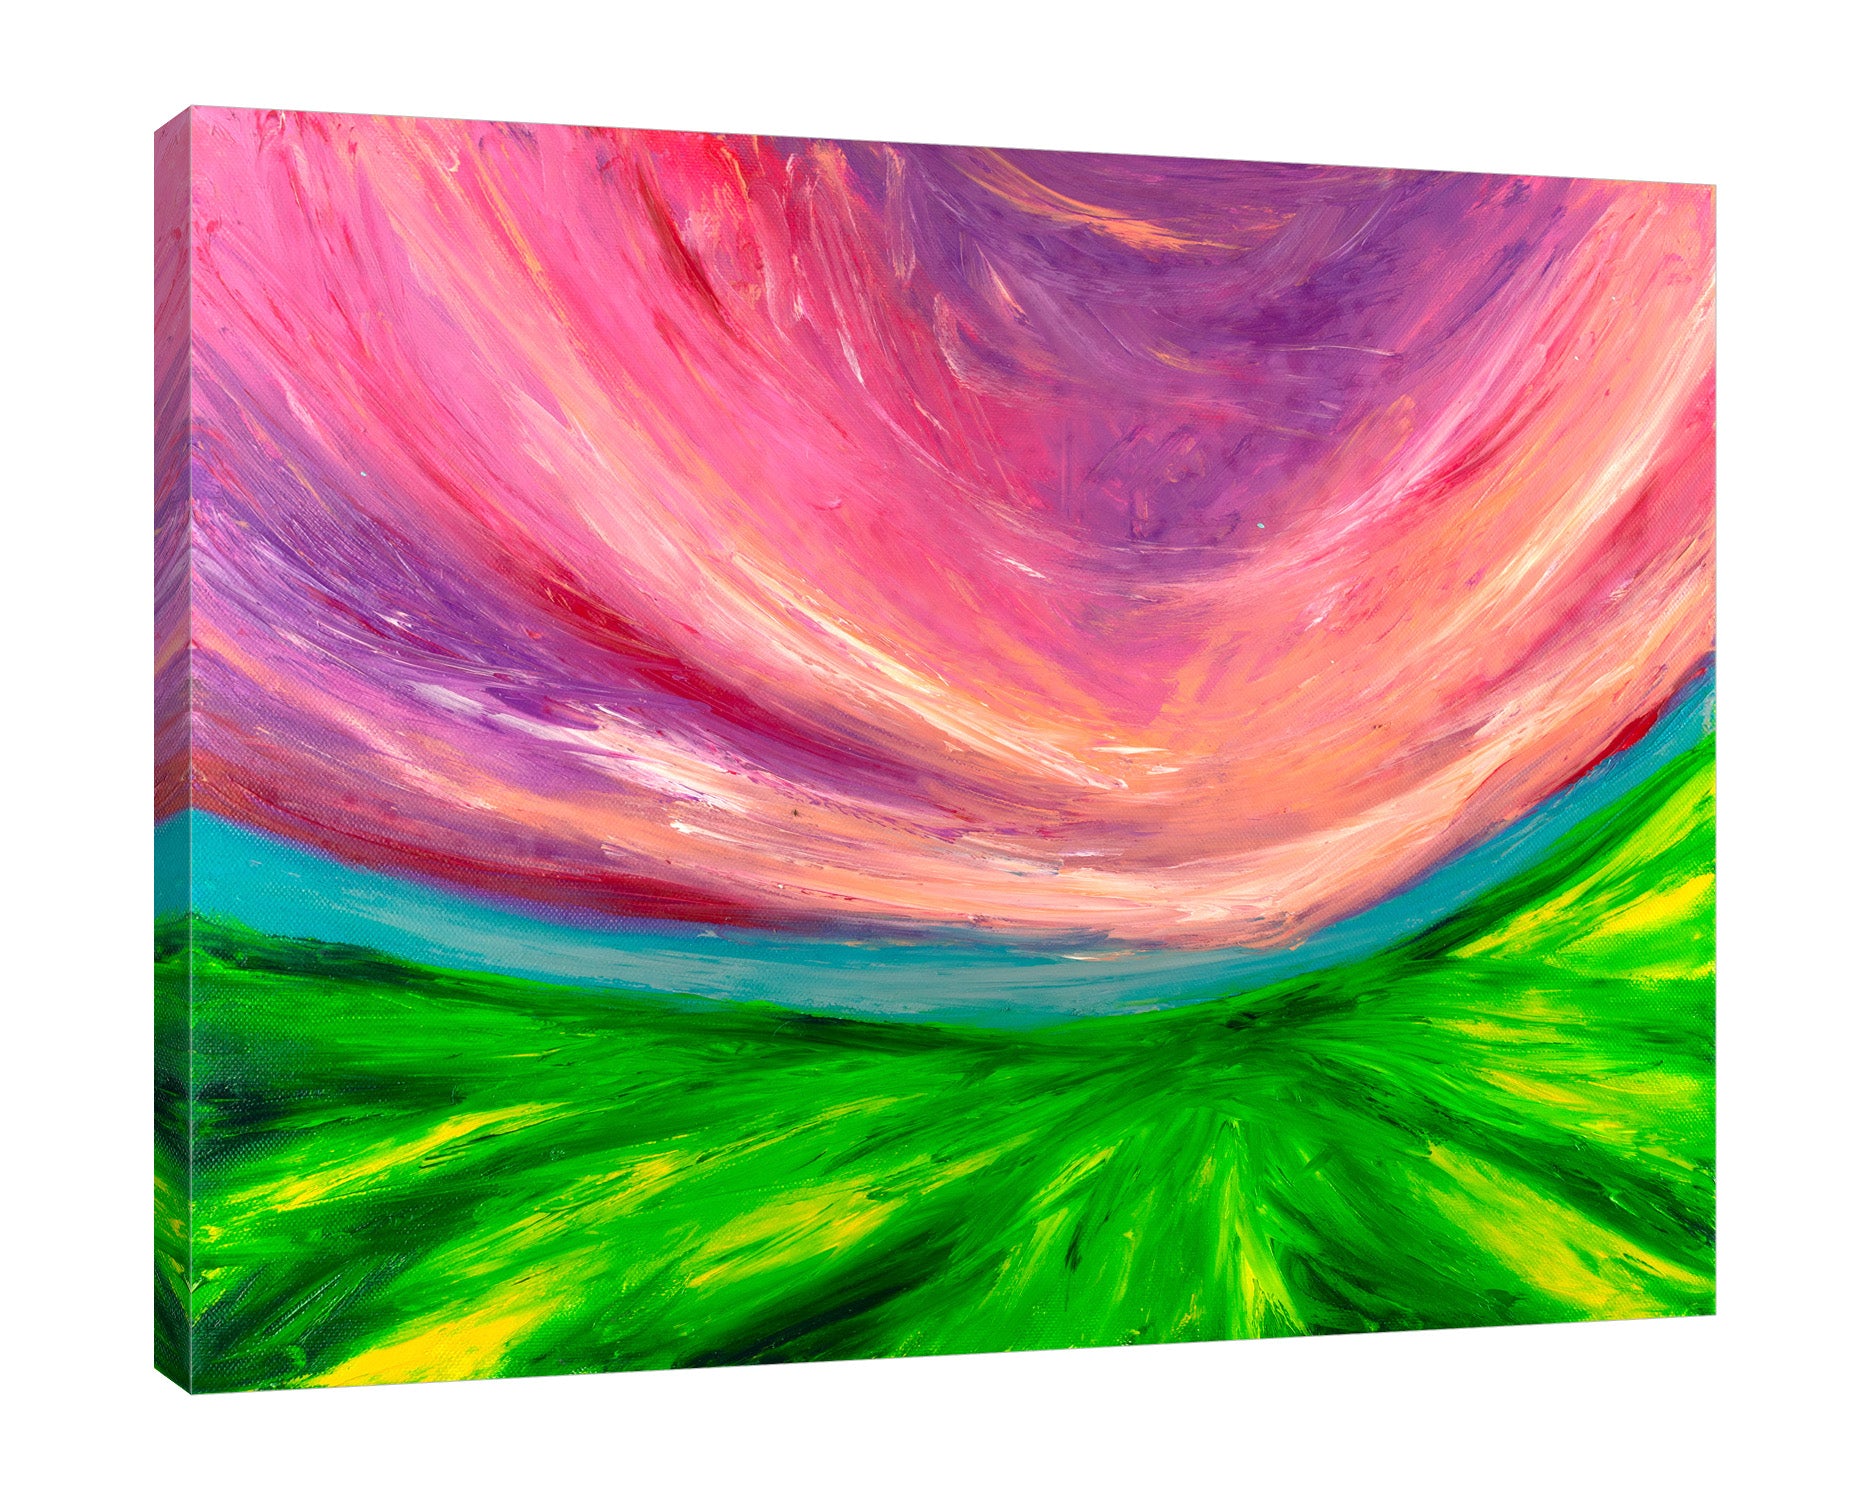 Chiara-Magni,Modern & Contemporary,Abstract,Landscape & Nature,Finger-paint,pink,green,skies,blue,fields,violet,lines,abstract,